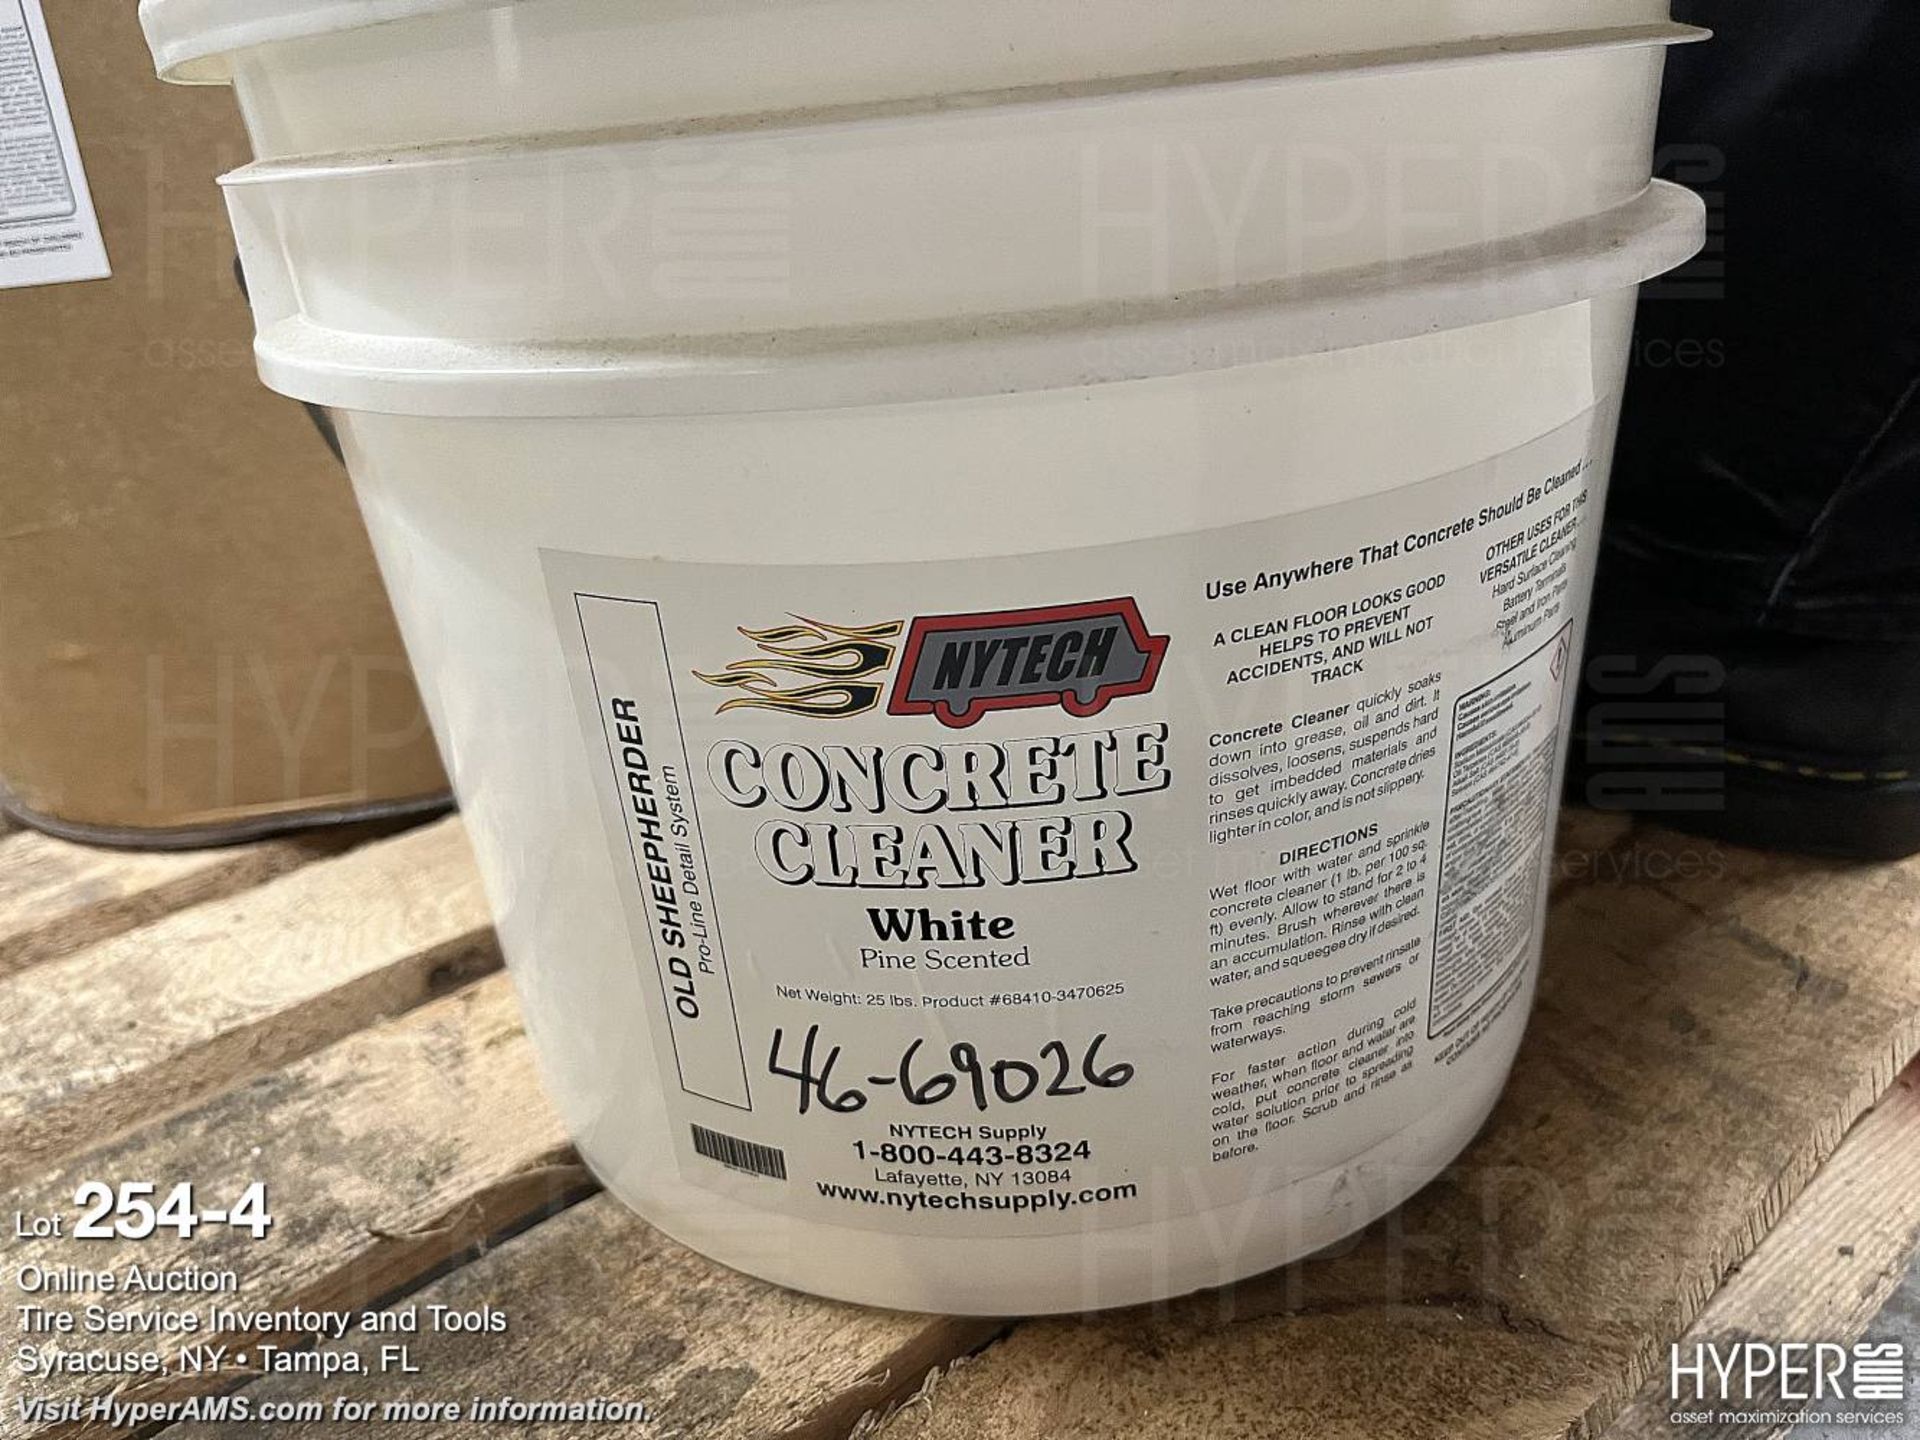 Concrete cleaner - Image 4 of 4